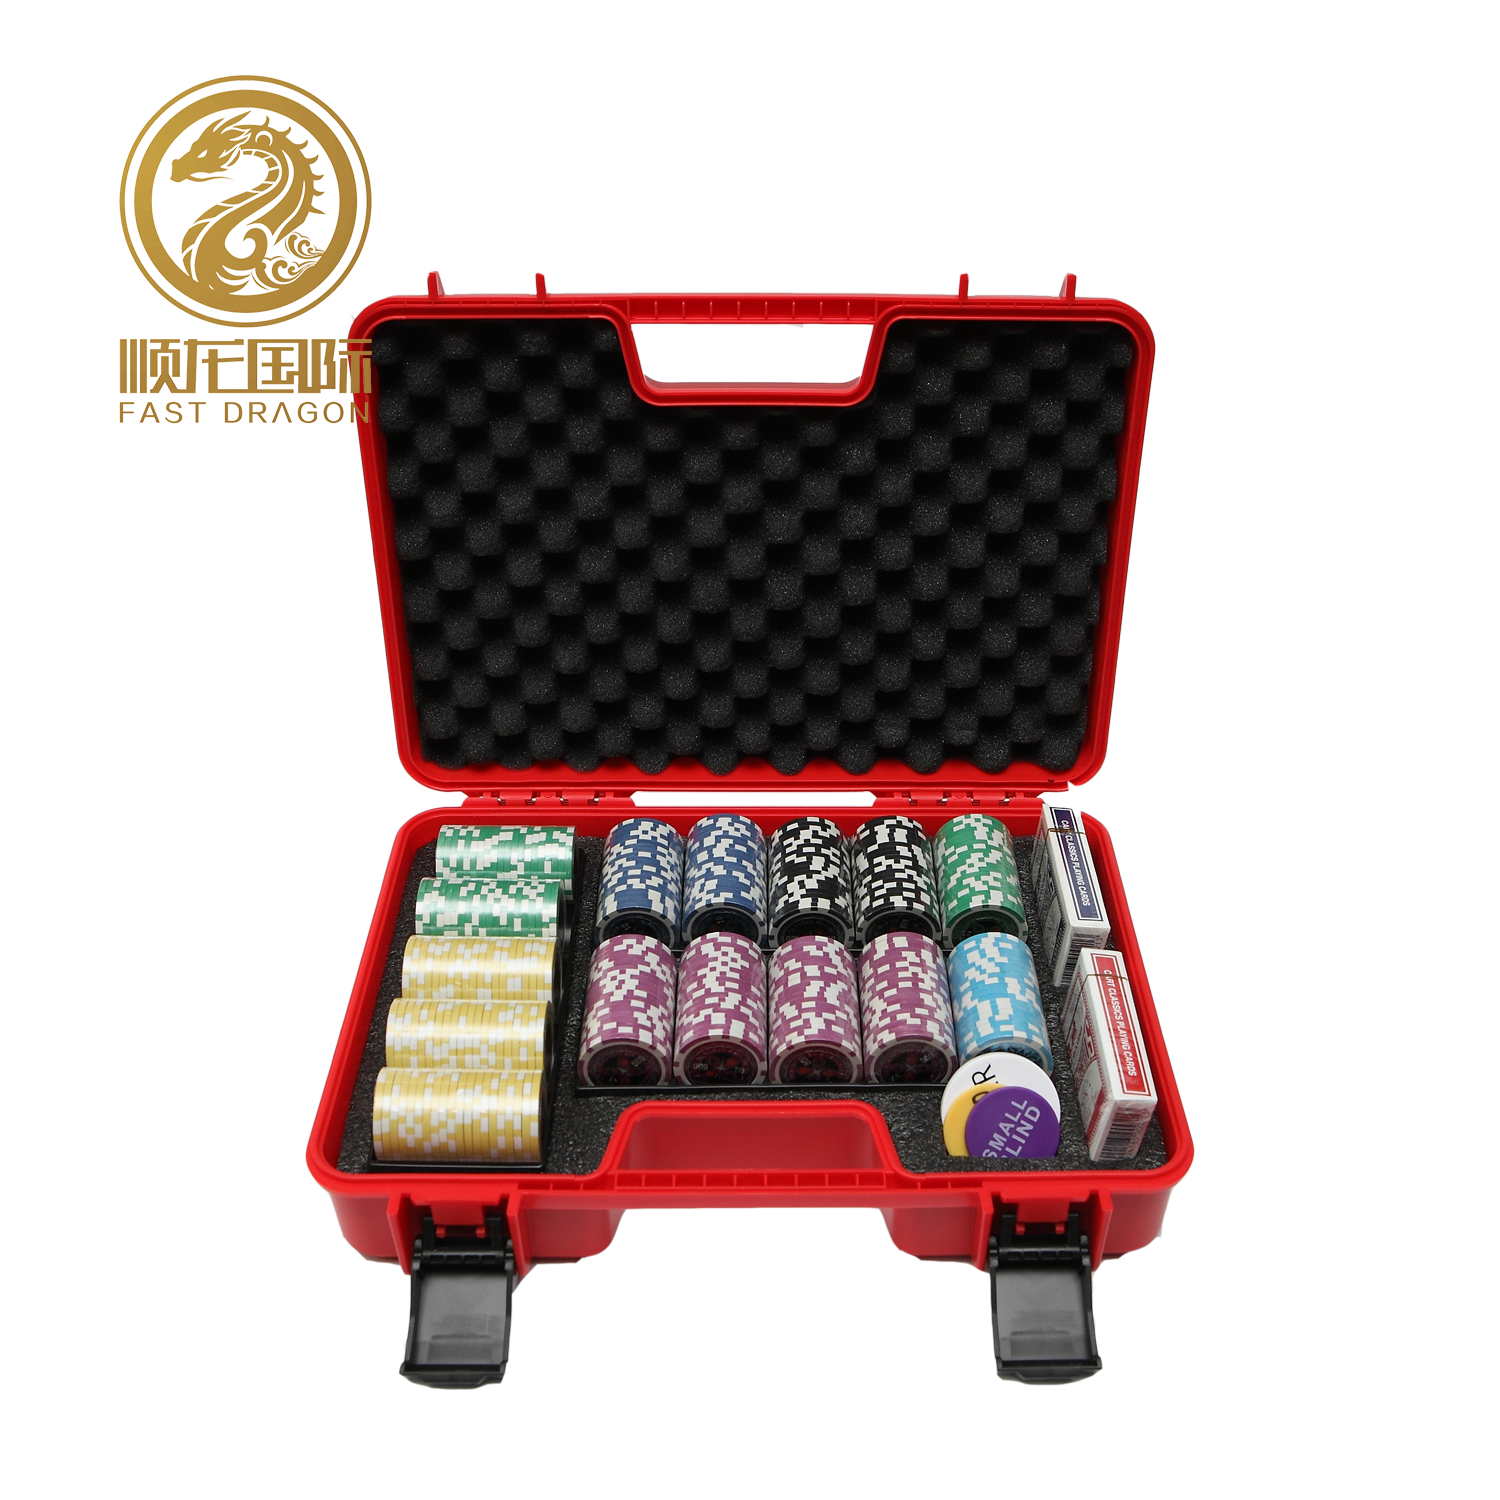 DRA-GB2023 300 PCS/Set 11.5g ABS Casino Texas Poker Chips Sets with ABS Suitcase 